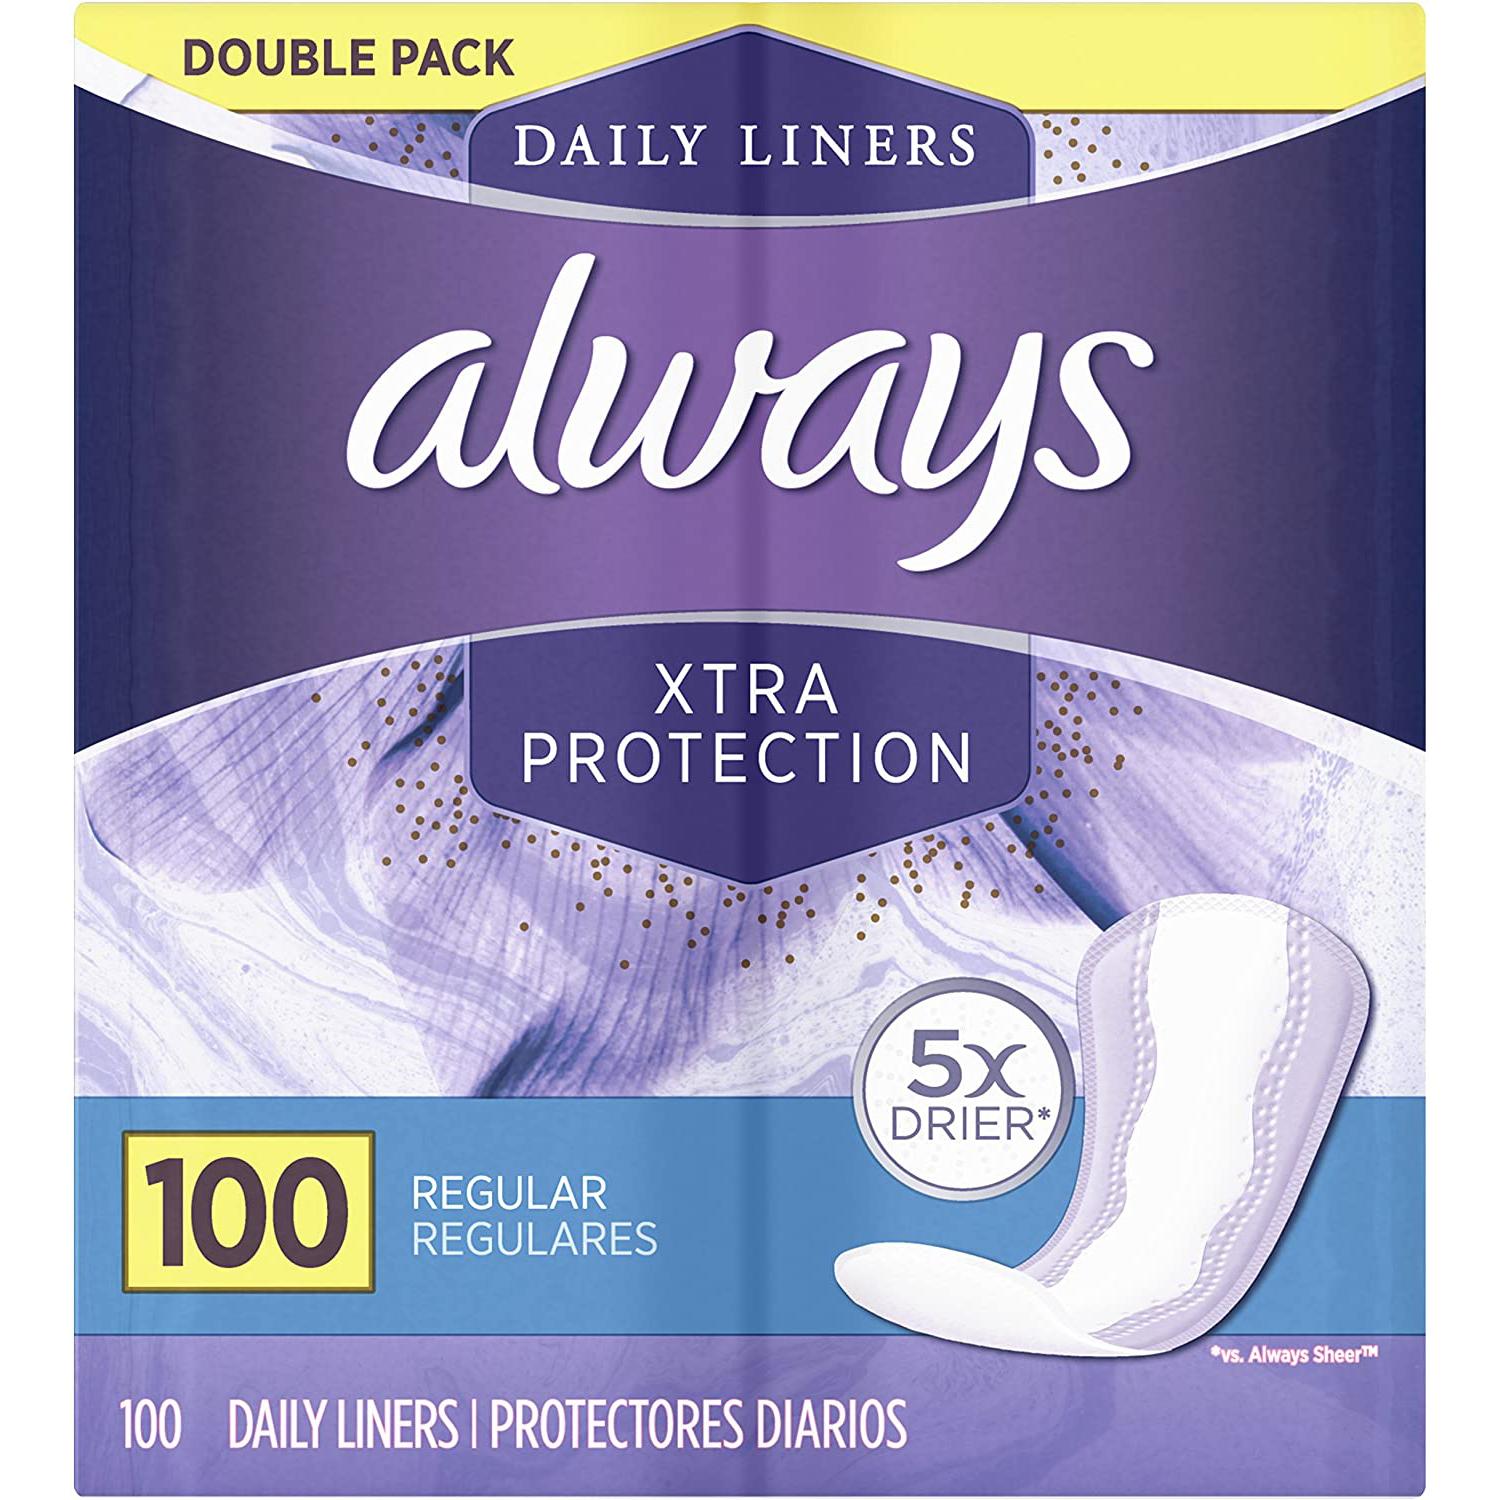 300 Always Xtra Protection Daily Liners for $9.94